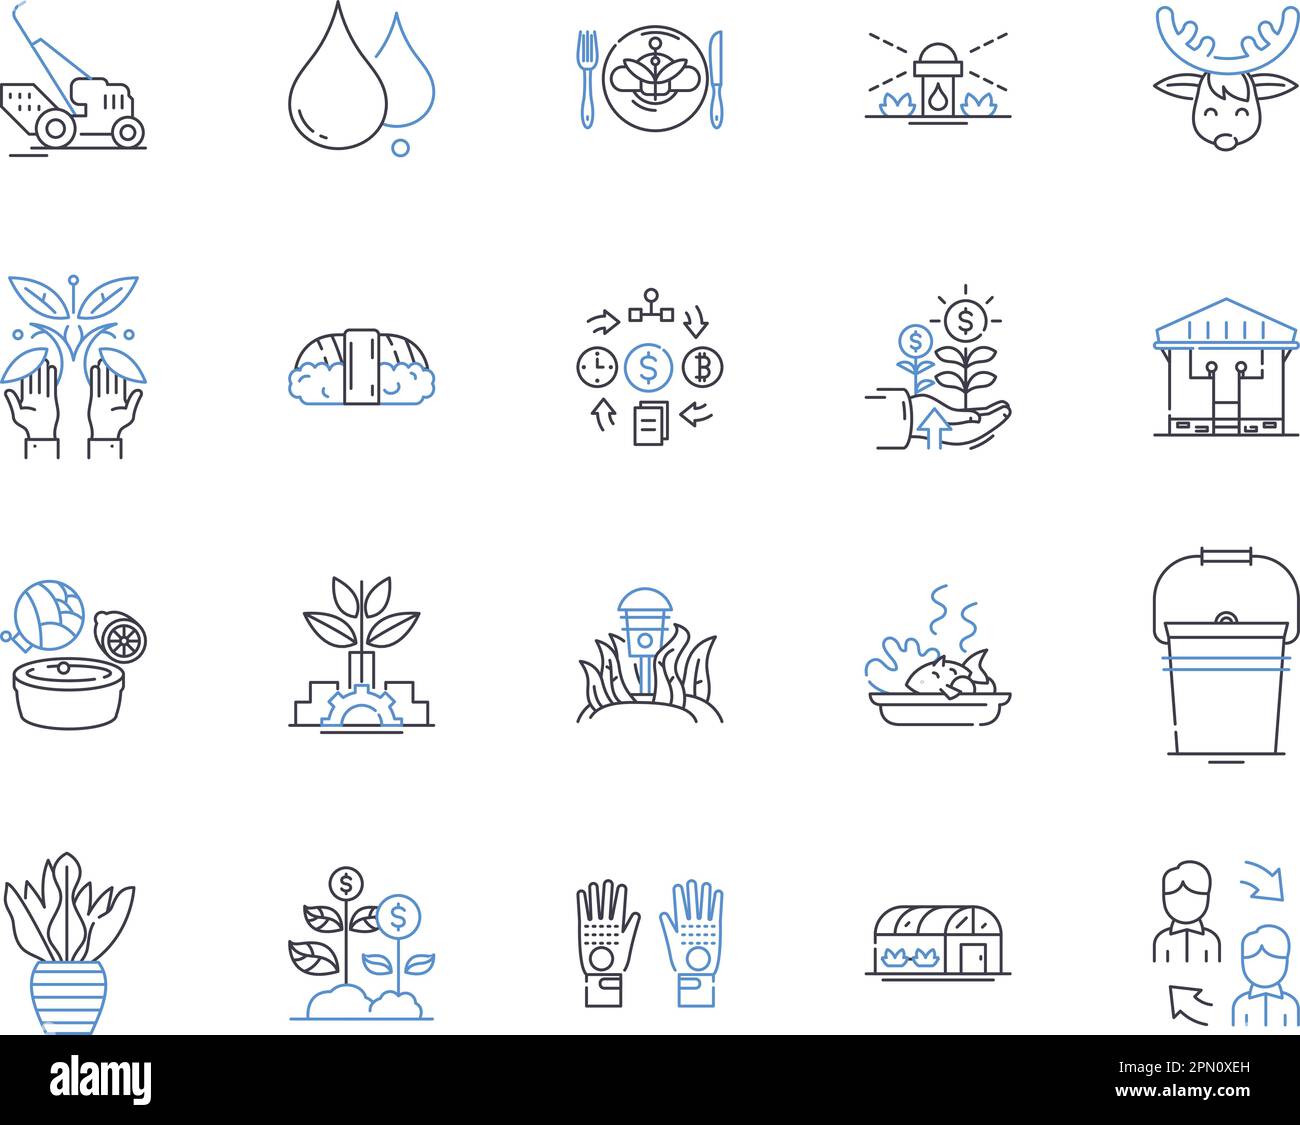 Farming factory outline icons collection. Farming, Factory, Agriculture, Crop, Cultivation, Grower, Harvester vector and illustration concept set Stock Vector